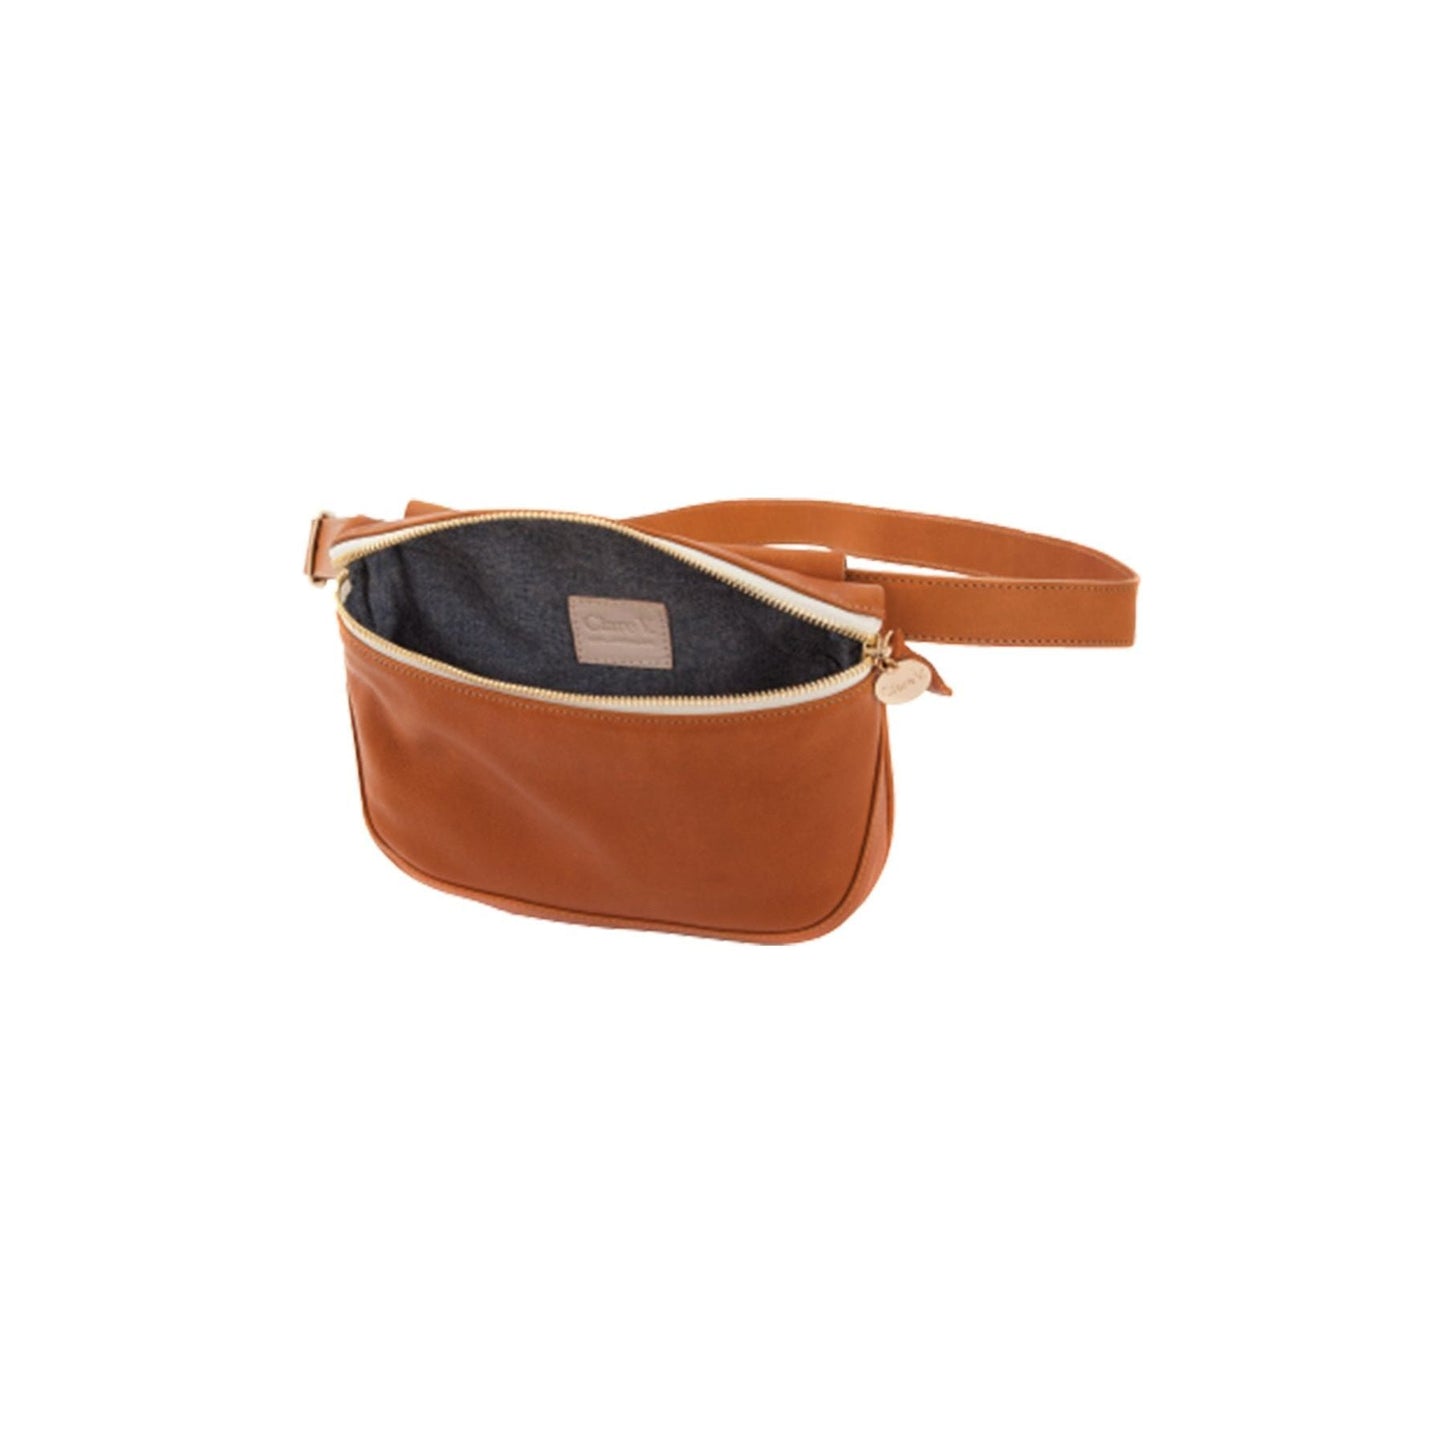 Clare V W Bags Neptune Fanny Pack, Tan